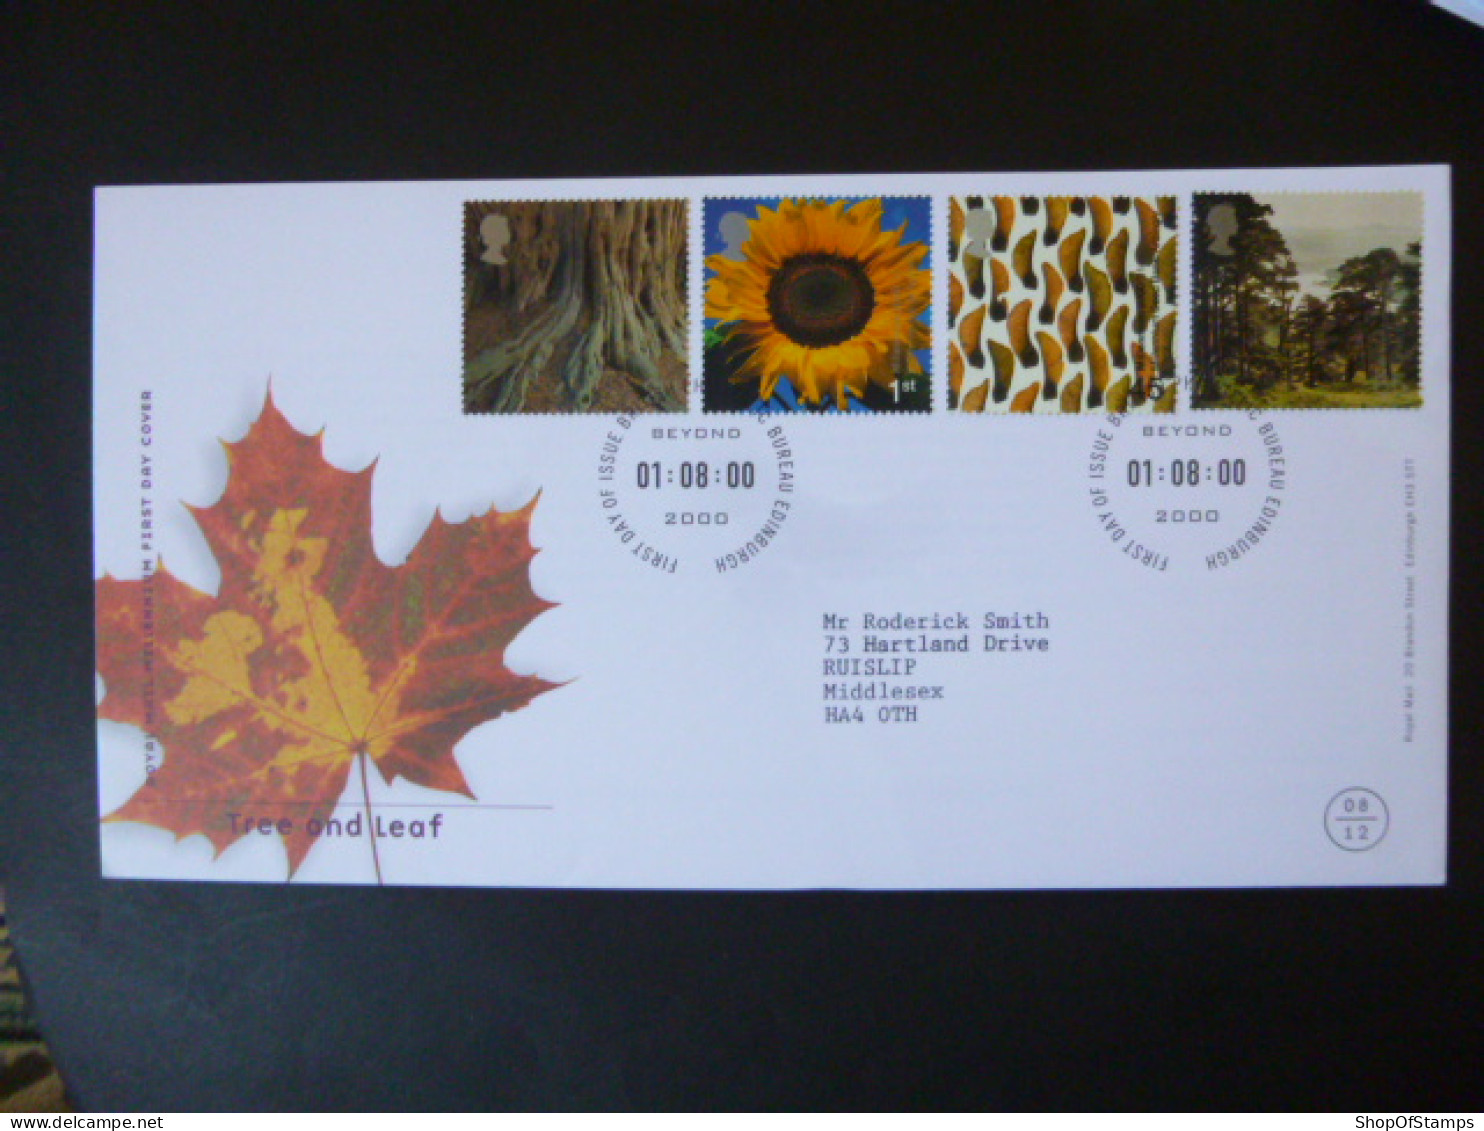 GREAT BRITAIN SG 2156-59 MILLENIUM PROJECTS, TREE AND LEAF FDC EDINBURGH - Unclassified